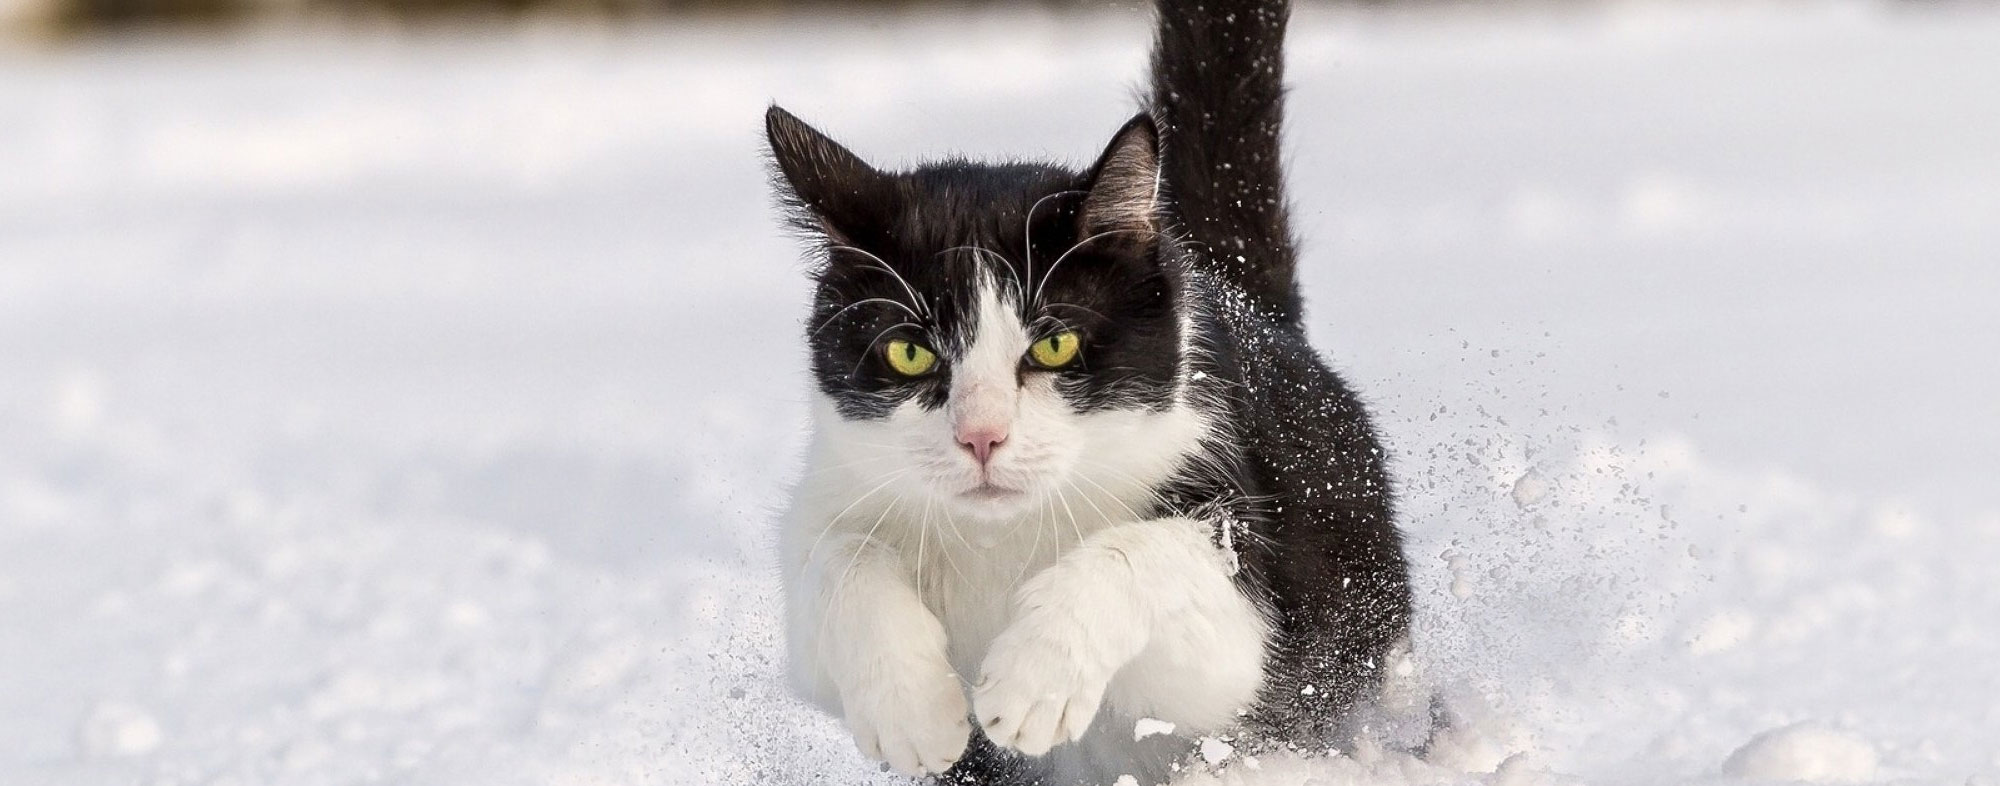 Your cat's paws could get swollen outside in the winter snow